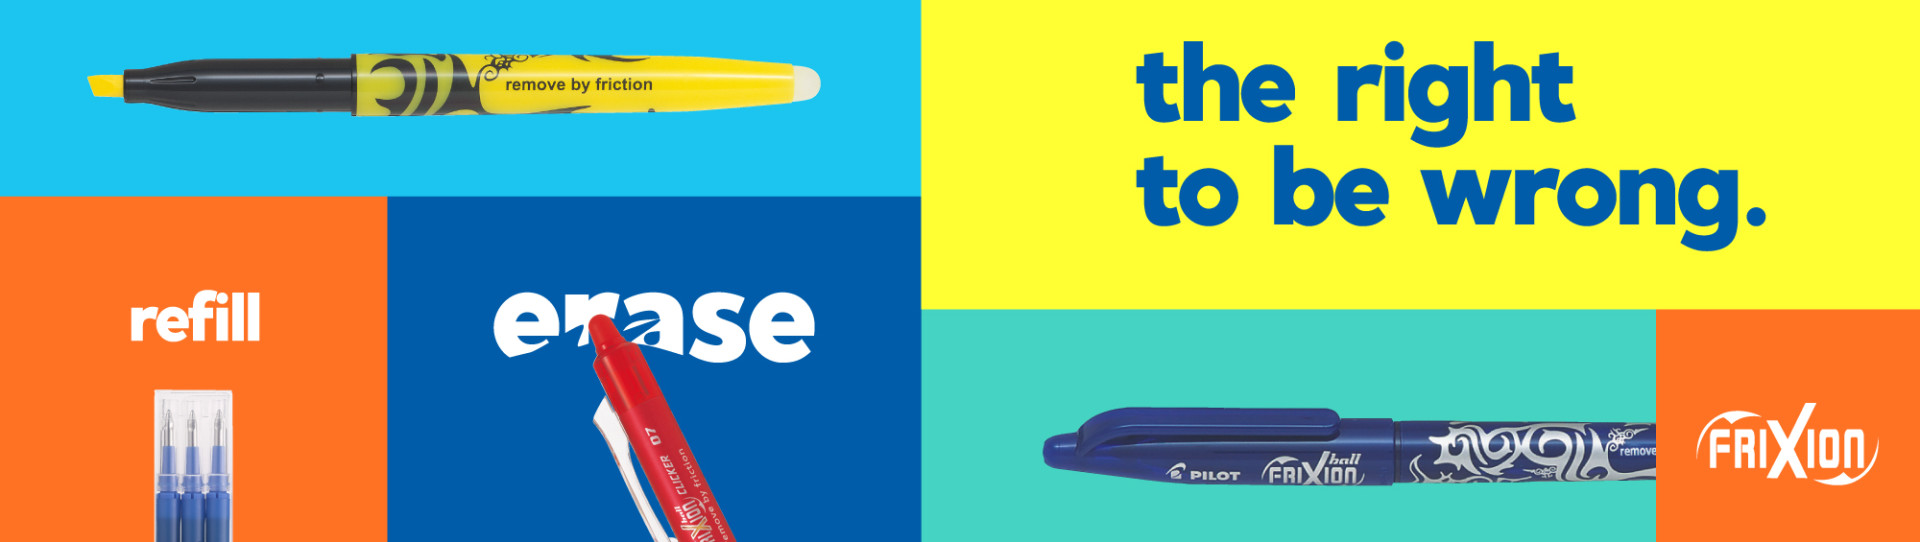 The Best Erasable Pens and Inks